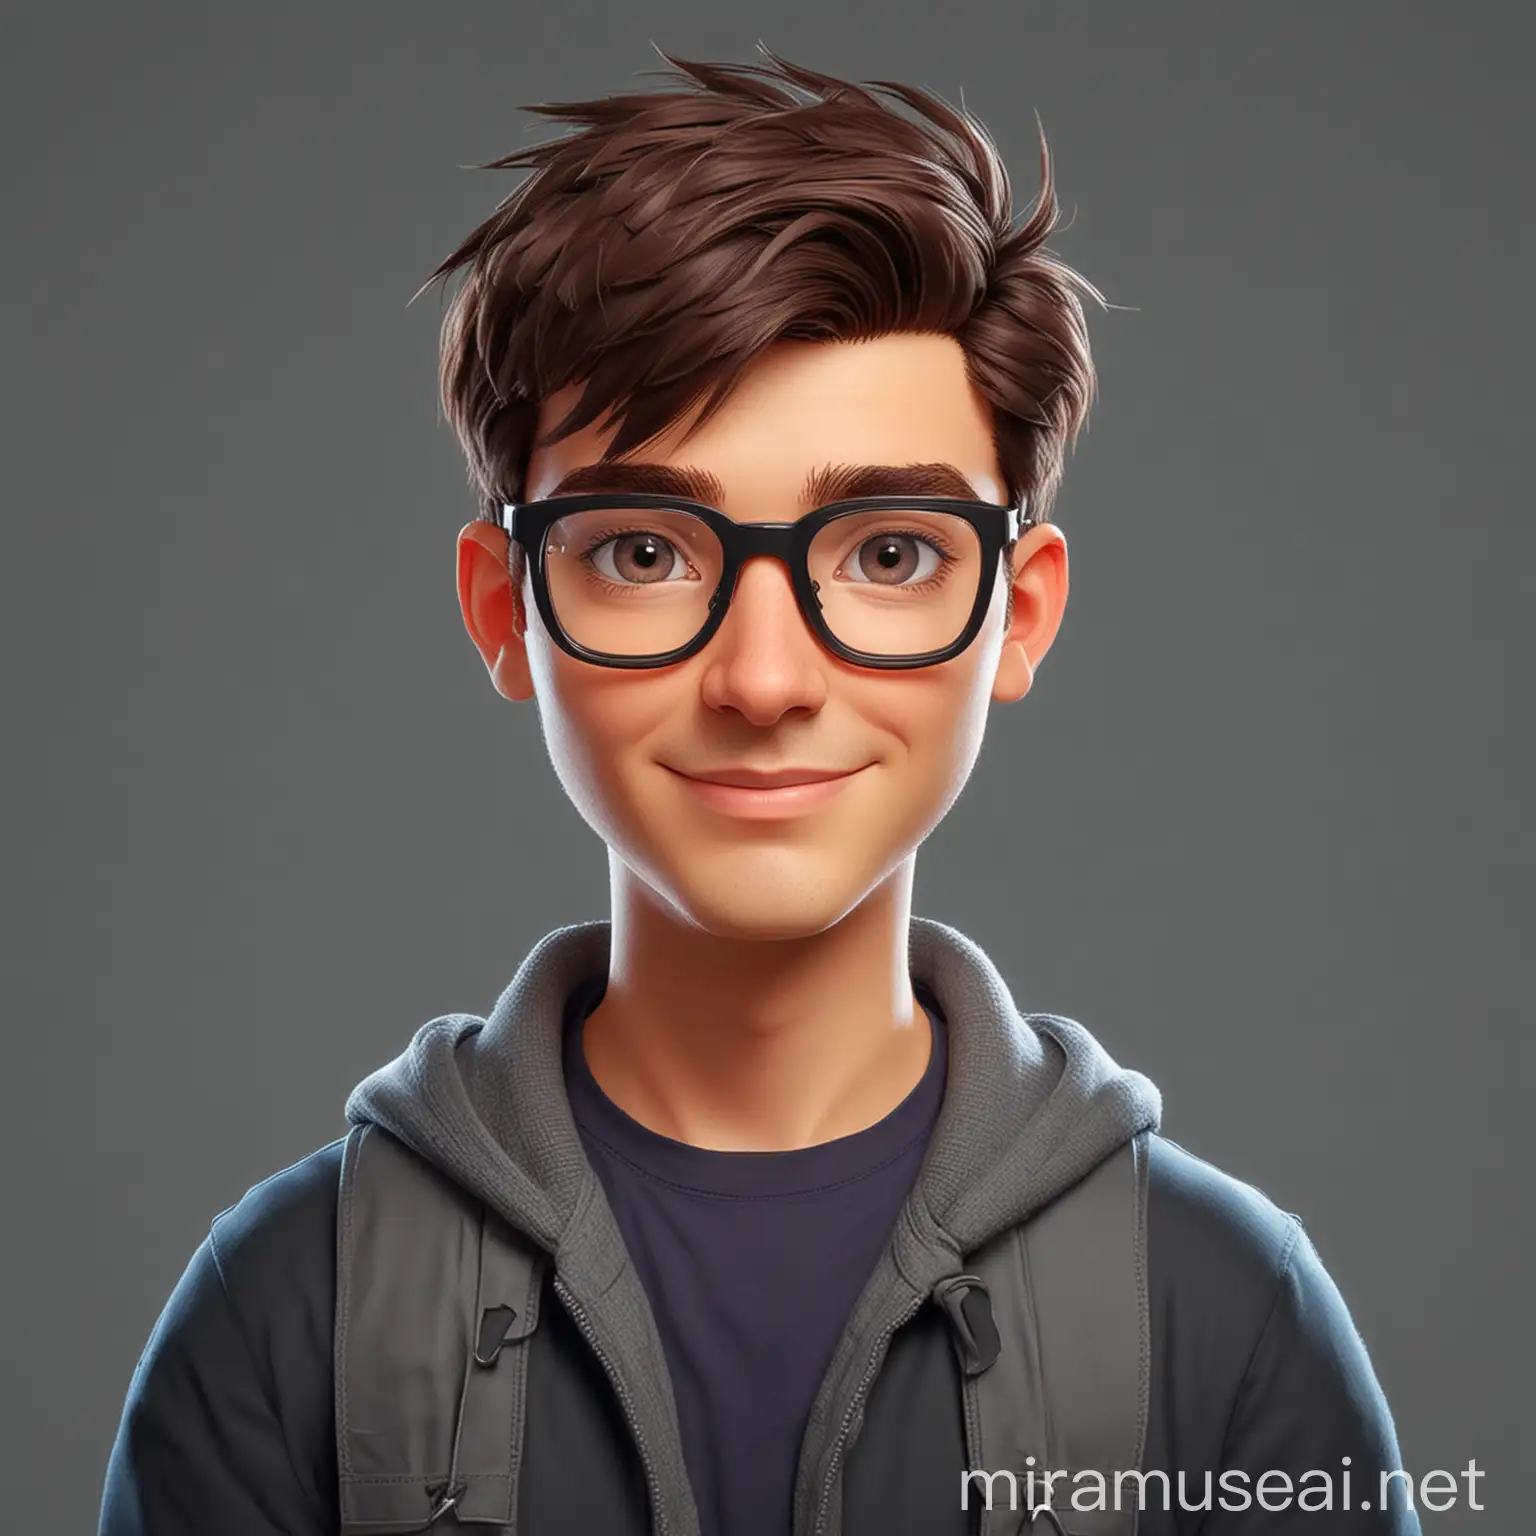 Cartoon Student Programmer Avatar with Glasses